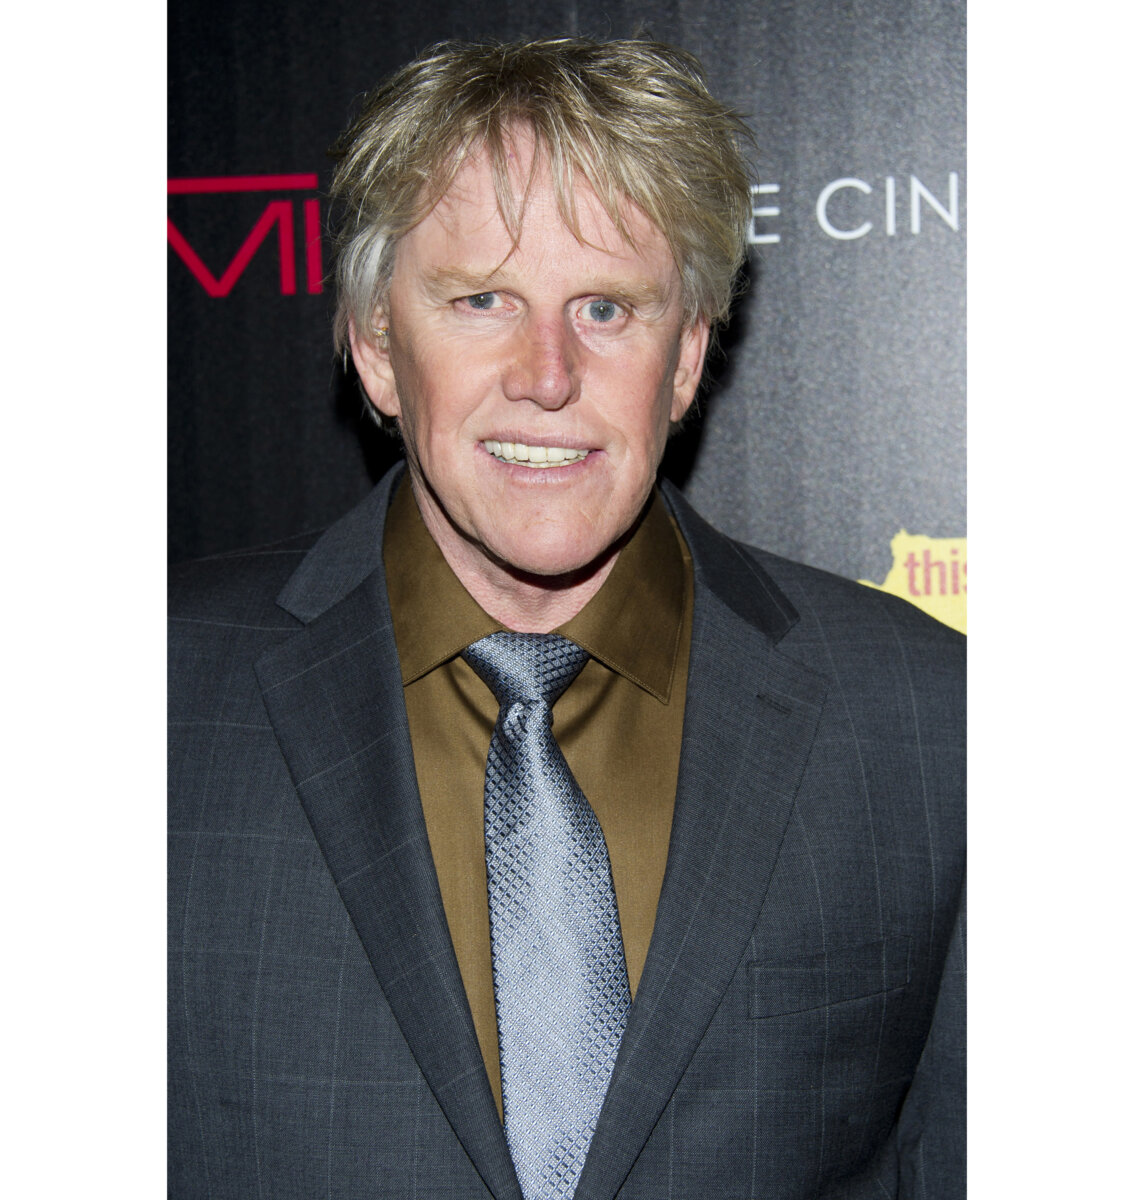 Sexual Misconduct Gary Busey